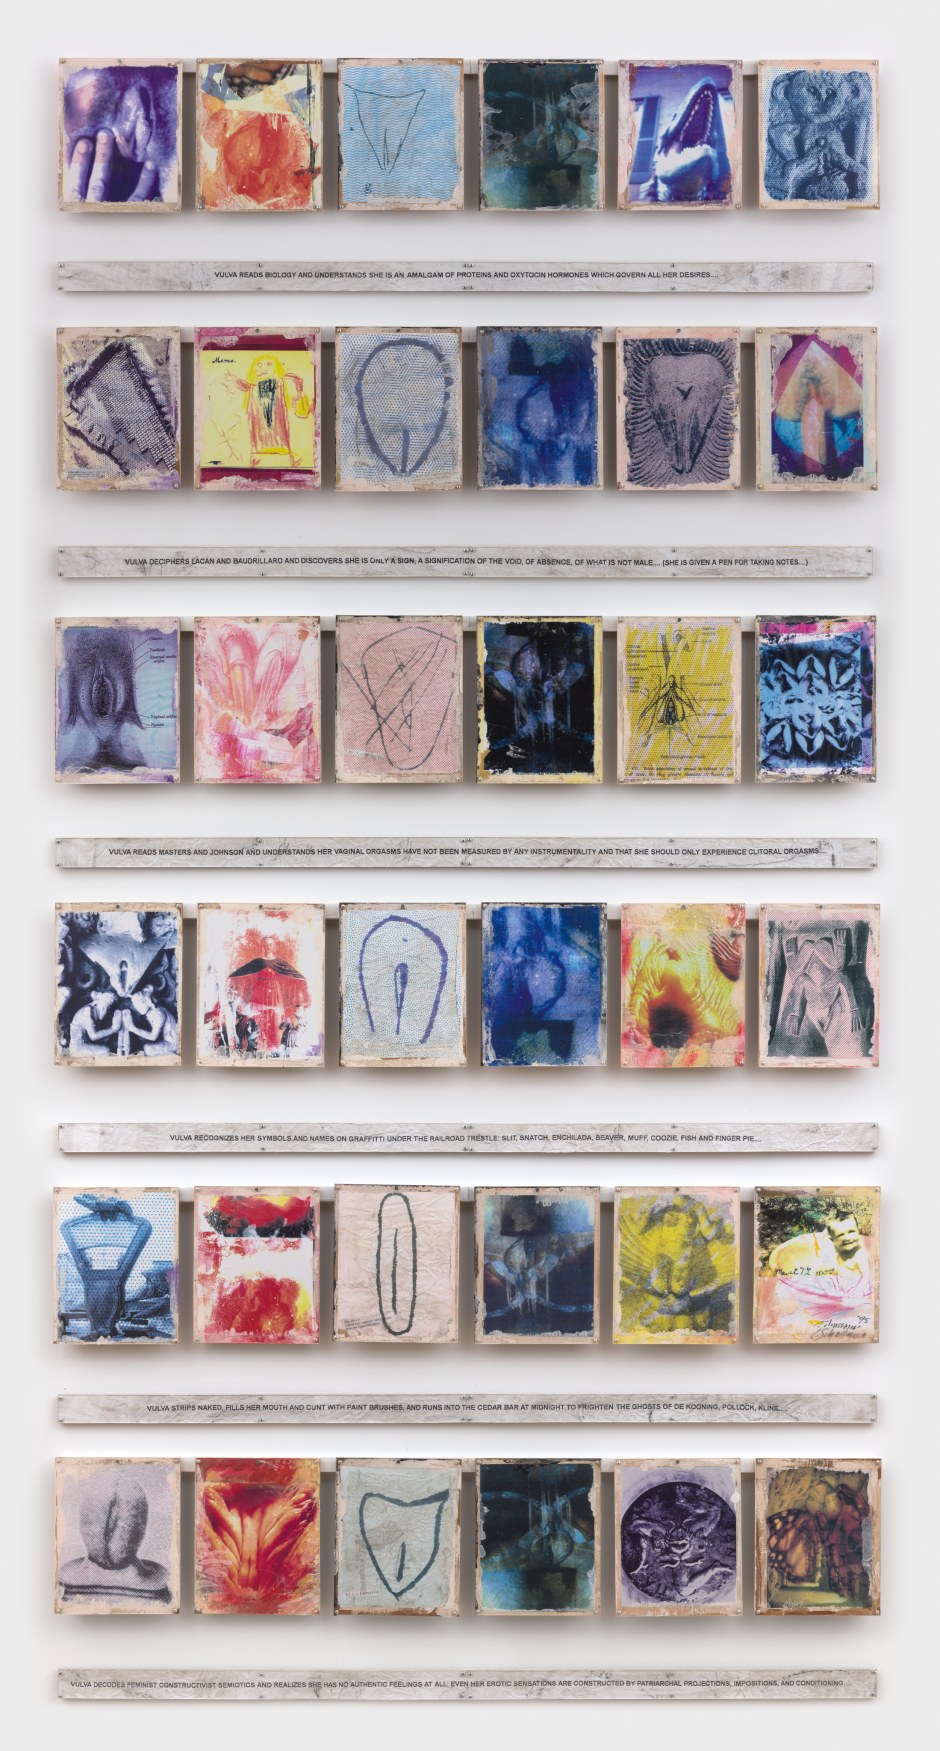 Carolee Schneemann  Vulva's Morphia, 1995  mounted 36 panel photo grid with hand painting, text inserts on wood, and fans  Overall size: 243.8 x 178.5 x 13.2 cm / 96 x 70 ¼ x 5 ¼ in  © Courtesy of the Carolee Schneemann Foundation, Hales Gallery, and P·P·O·W, New York  Photo: JSP ART PHOTOGRAPHY